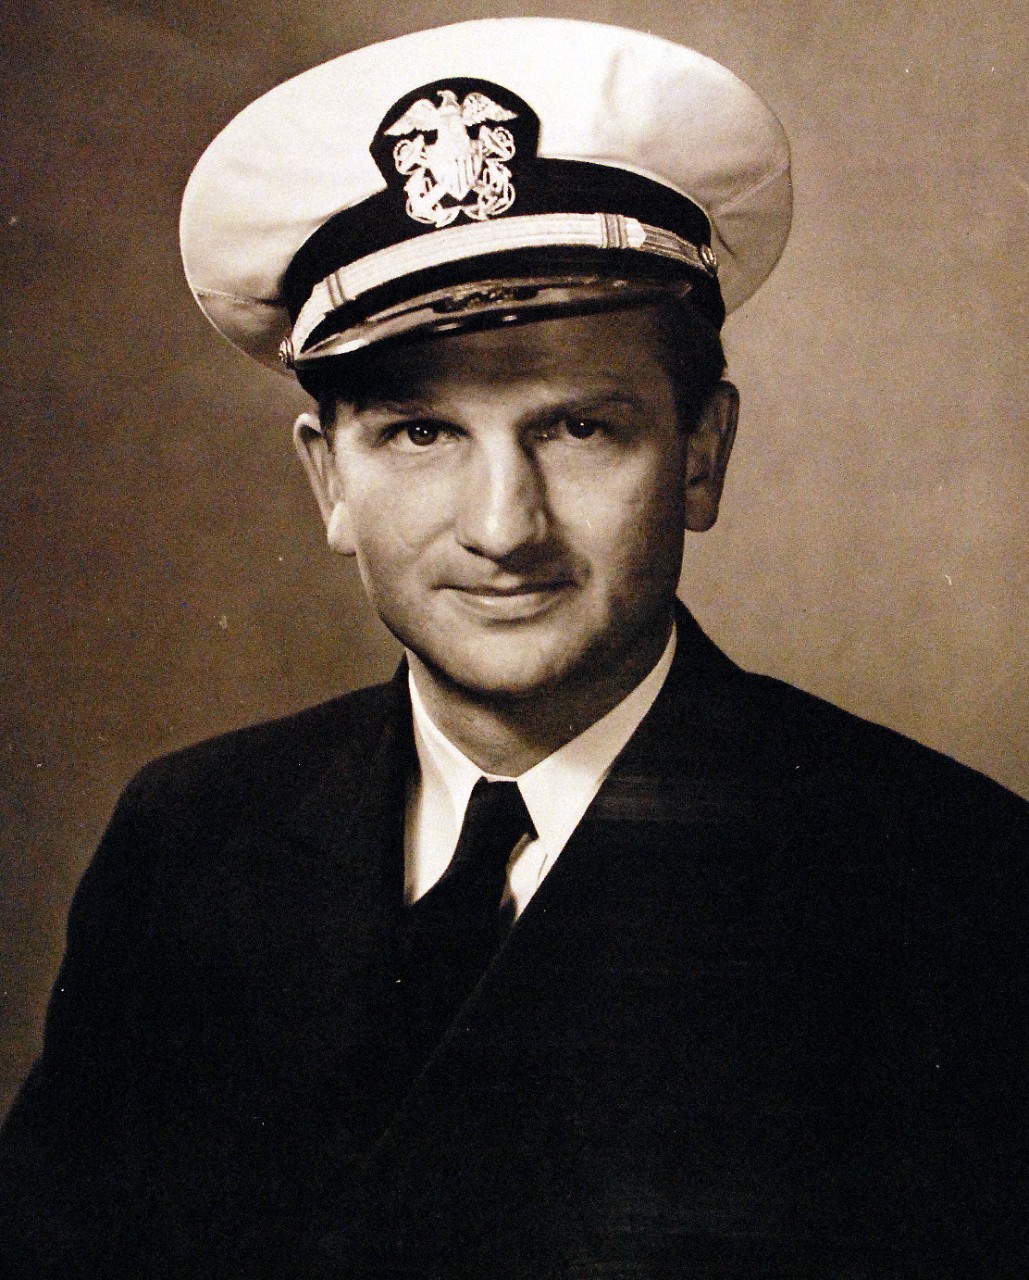 <p>80-G-43657: Sinking of German U-boat, U-405. Lieutenant Charles H. Hutchins, USNR, Commanding Officer of USS Borie (DD 215) who received the Presidential Unit Citation ribbon in recognition of the work of his destroyer, part of a task unit, which included USS Card (CVE-11). He received the Navy Cross at the same time. Hutchins’ vessel came upon two submarines on a dark, stormy night, miles from the other vessels and attacked immediately. The Borie rammed the other and sat astride, pumping shells into her conning tower from every gun that could be manned, from shotgun to big rifles. So close was the range, running from 10 to 40 feet, that even one knife hit was scored on a member of the Nazi gun crew. The submarine sank on November 1, 1943, but the Borie was mortally wounded and had to be abandonded and destroyed the following day. Photograph released November 11, 1943.&nbsp;</p>
